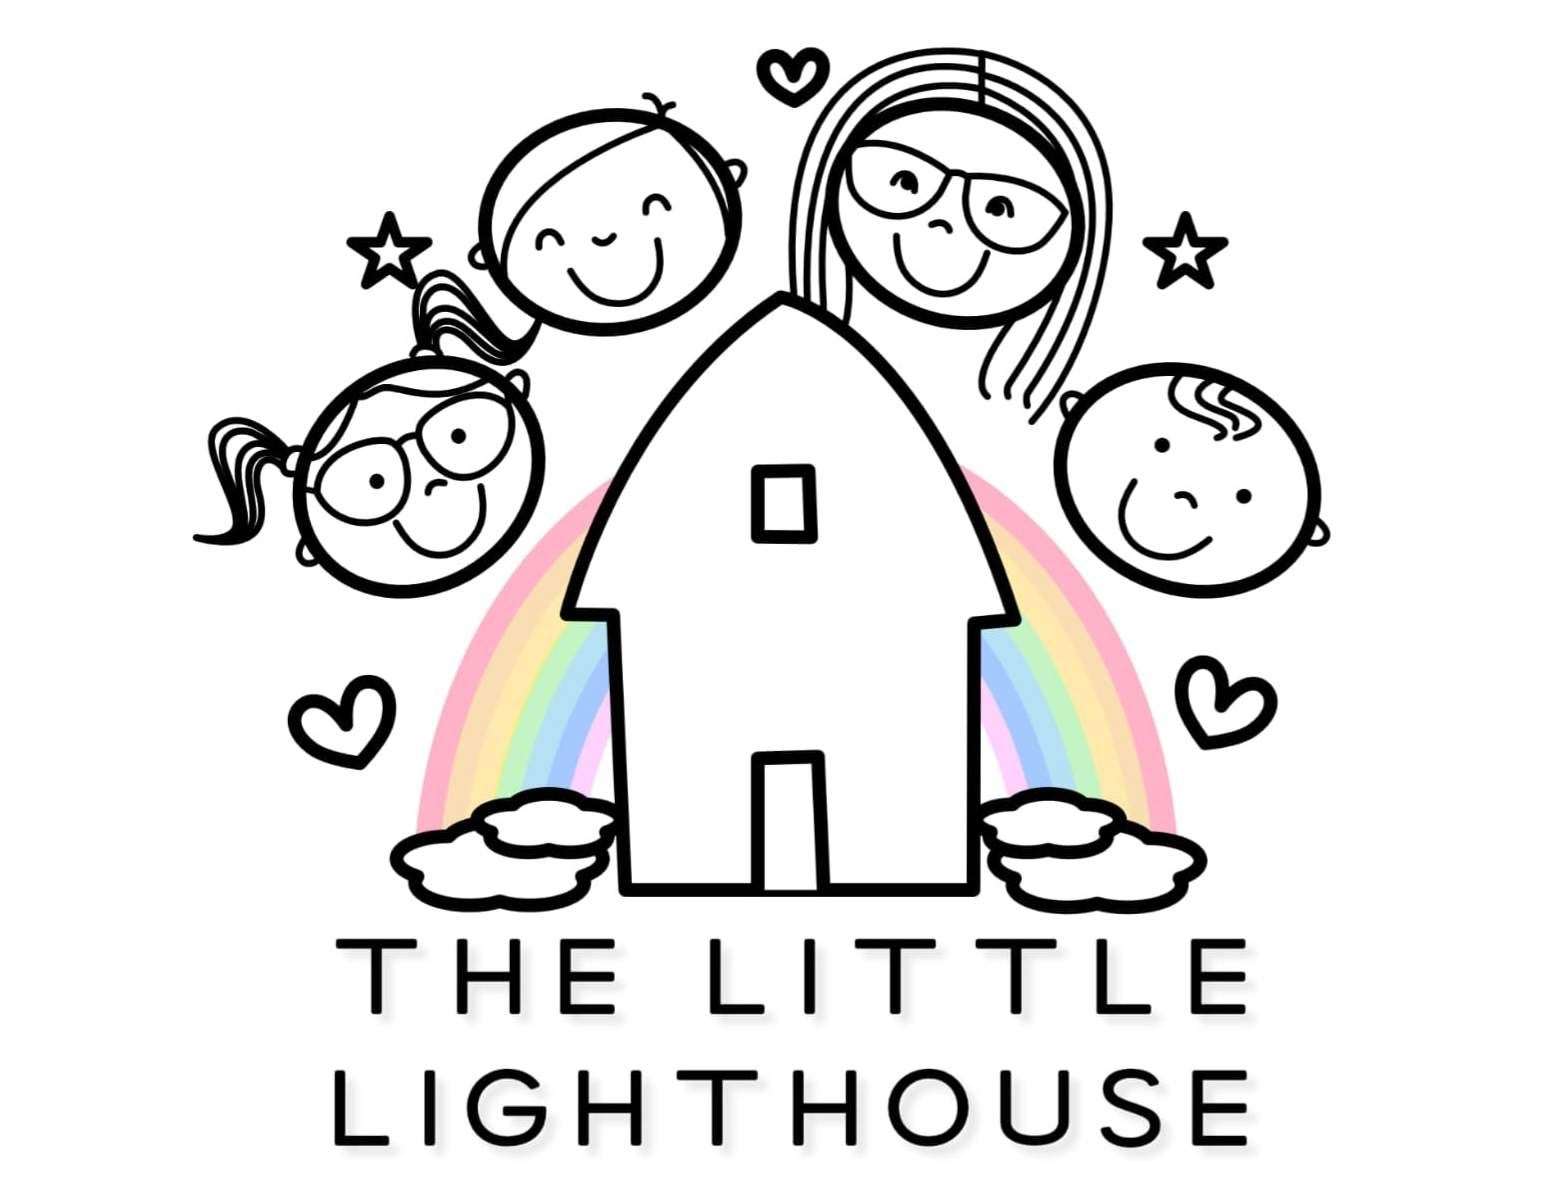 The Little Lighthouse is set to open in Sellindge in June